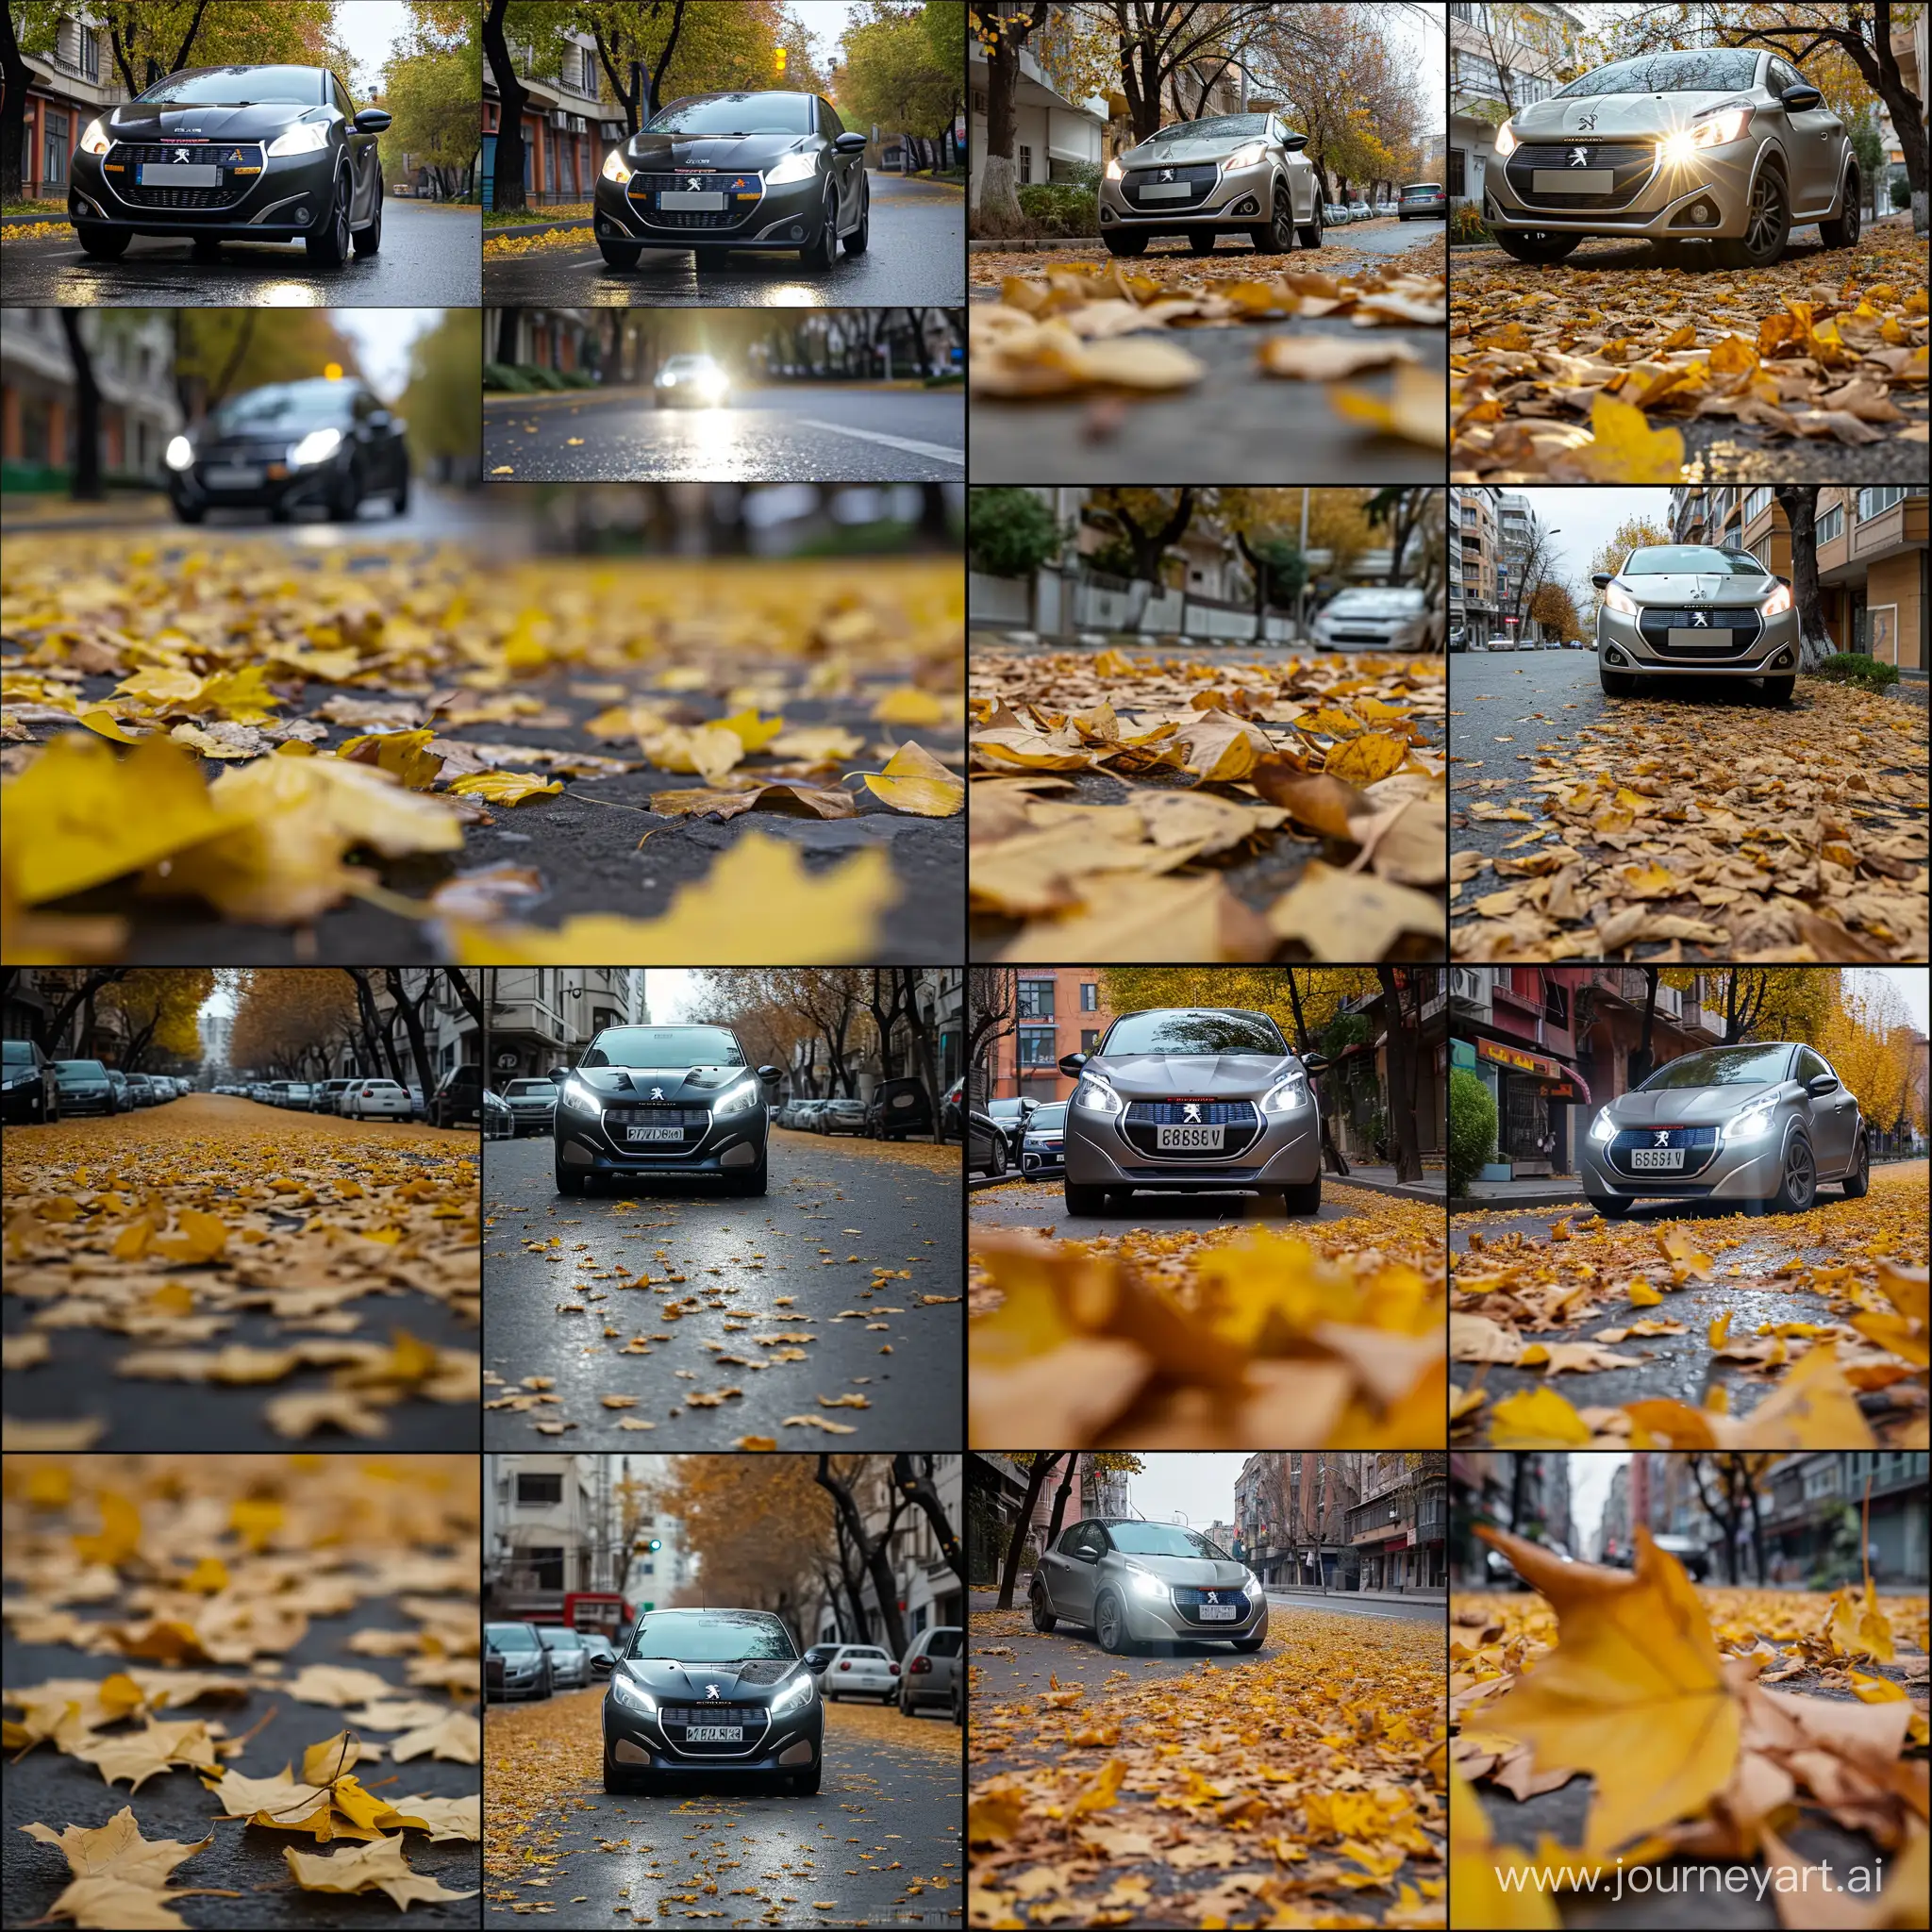 a Iranian peugeot 207 plus with high beam front light in day in a street that has a lot of yellow leaves on the ground and the car be close not far from the camera. give ,me 4 photos in different aspect of view. one from front side and the rest. the car be near to camera not far